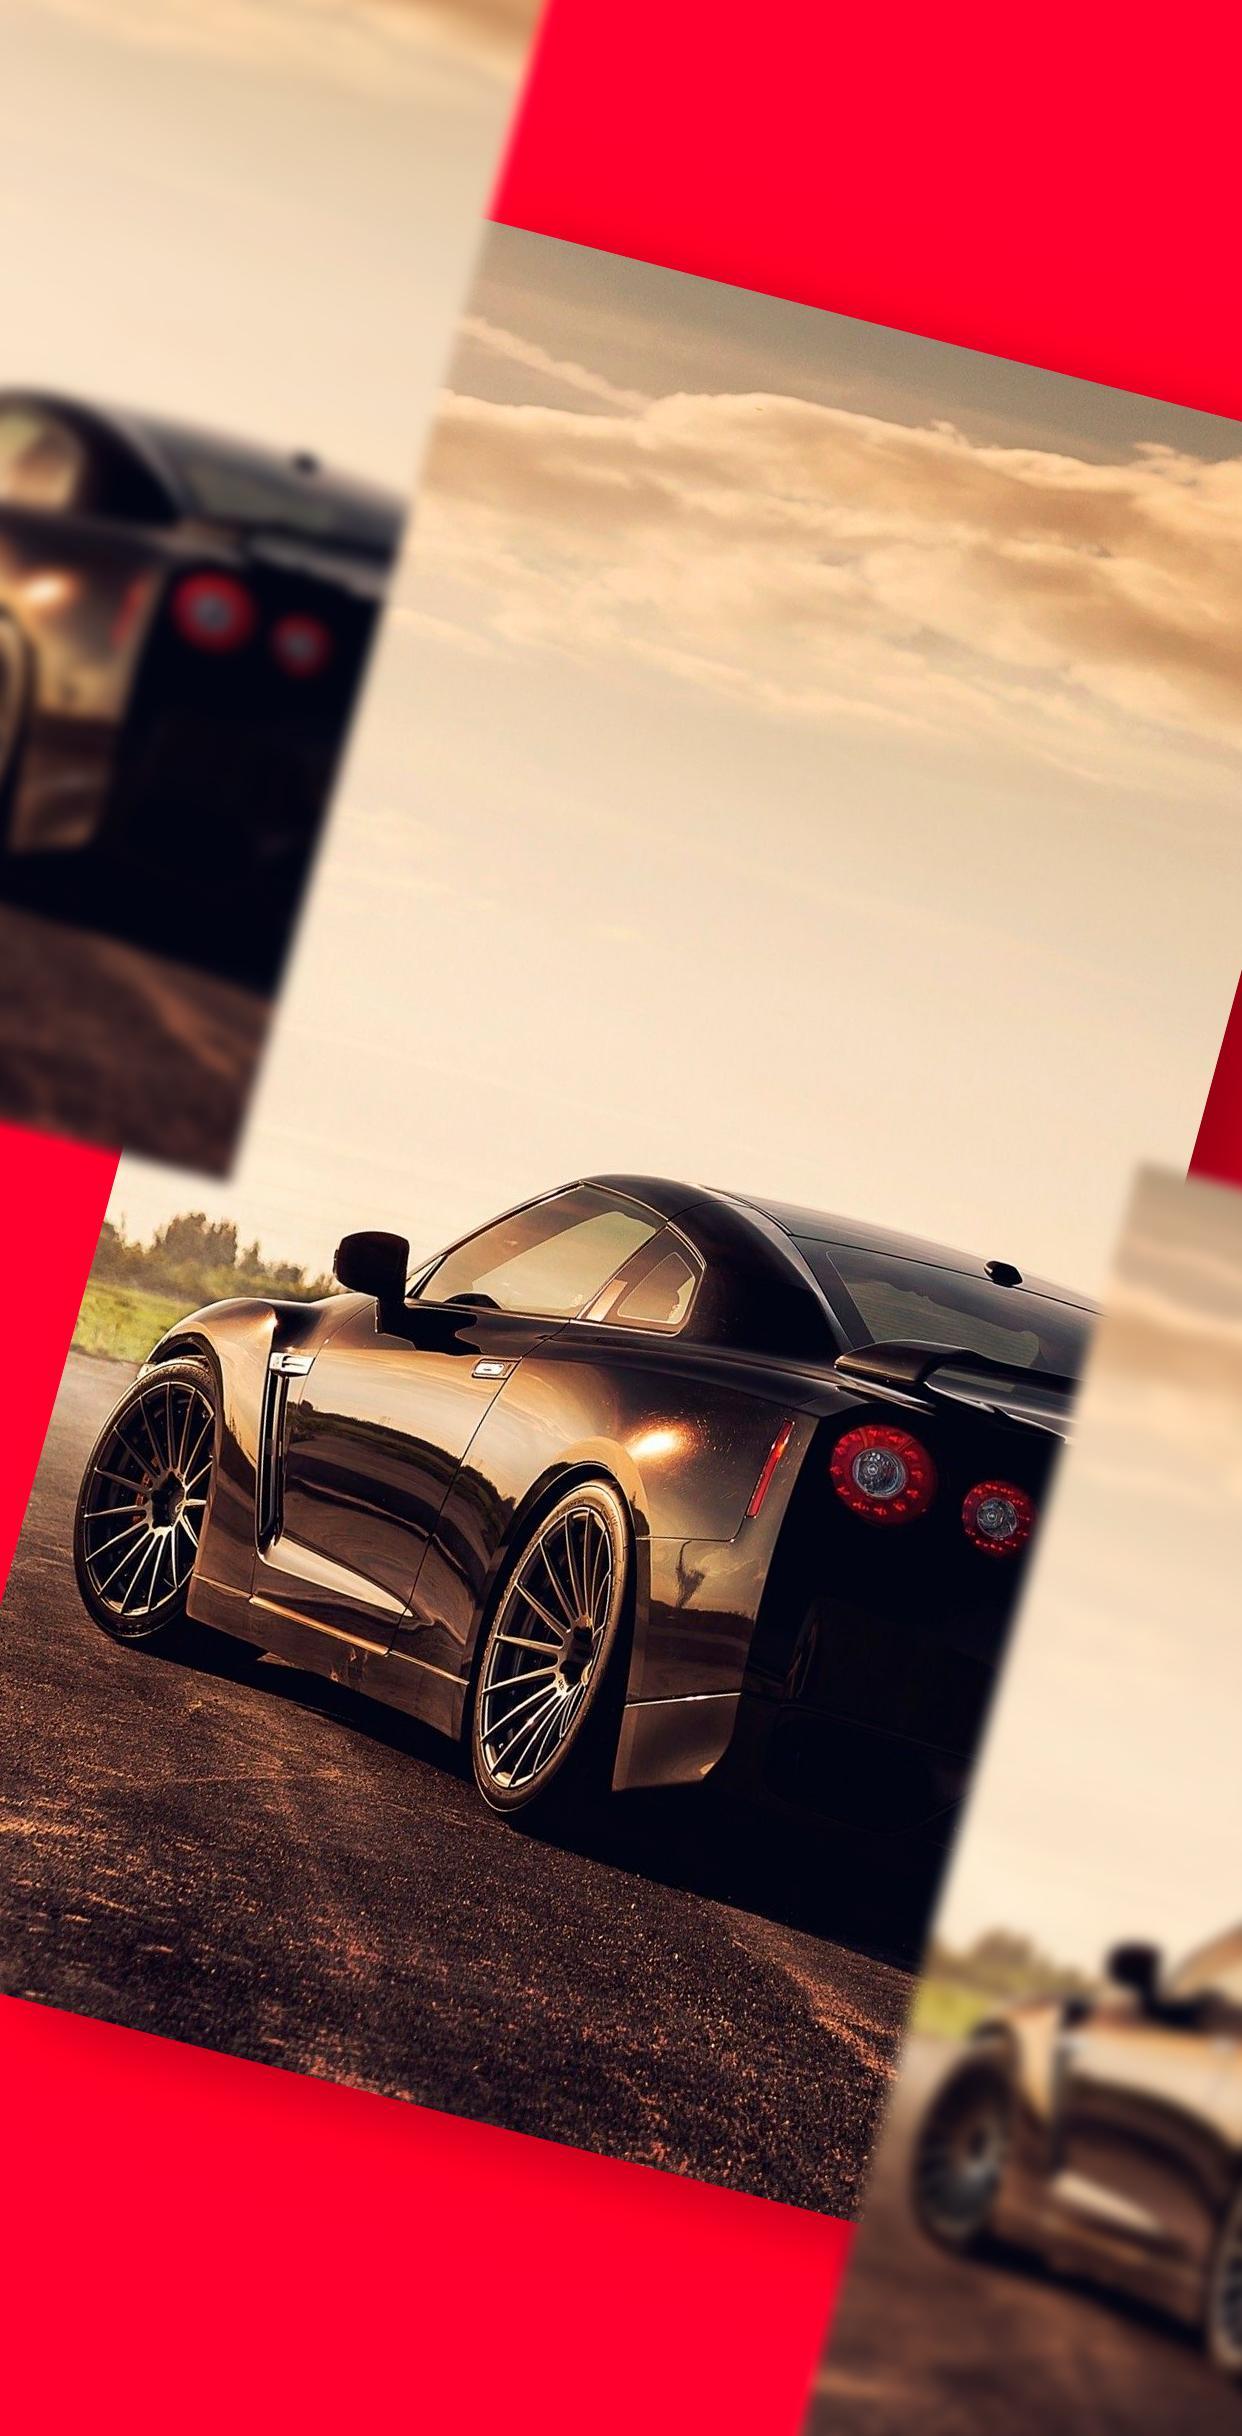 Skyline Gtr R34 Wallpapers Sports Car Wallpapers For Android Apk Download - r34 rims roblox